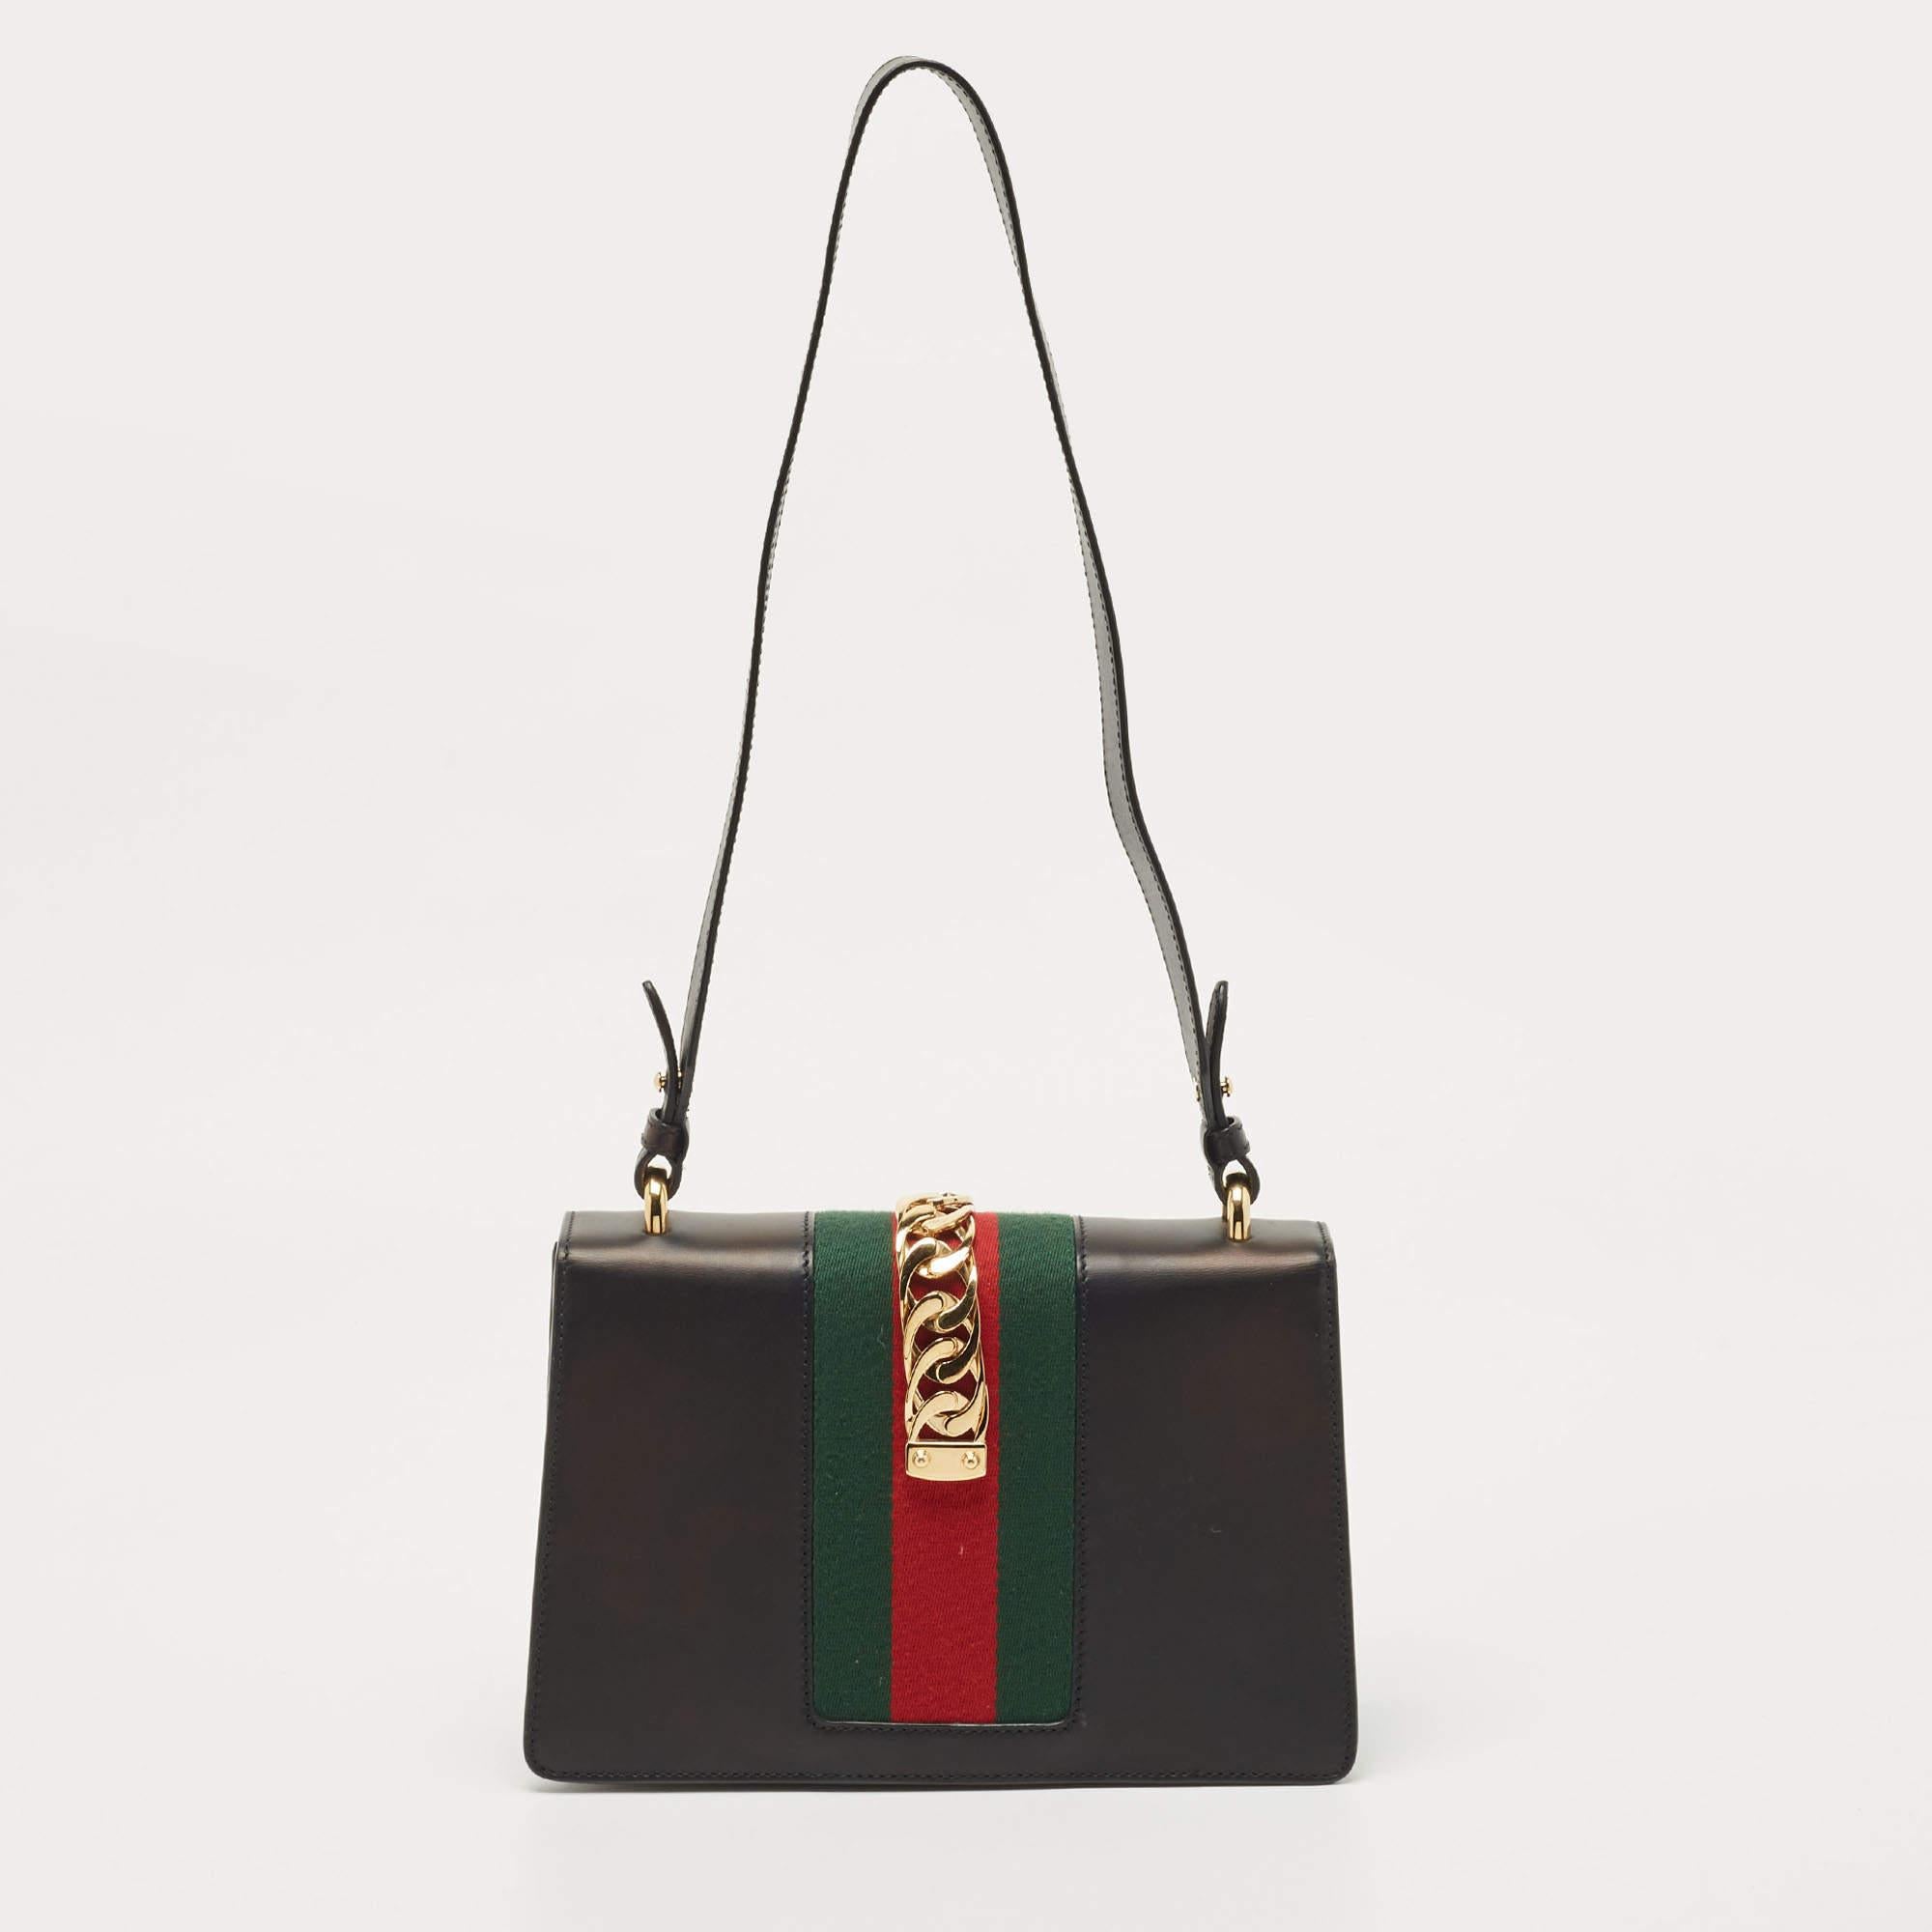 All the creations from Gucci, like this Sylvie bag, reflect a sense of innovation and tradition. Crafted from leather, it is admired for its timeless elegance and structured silhouette. The striking chain design on the Web stripe detailing elevates